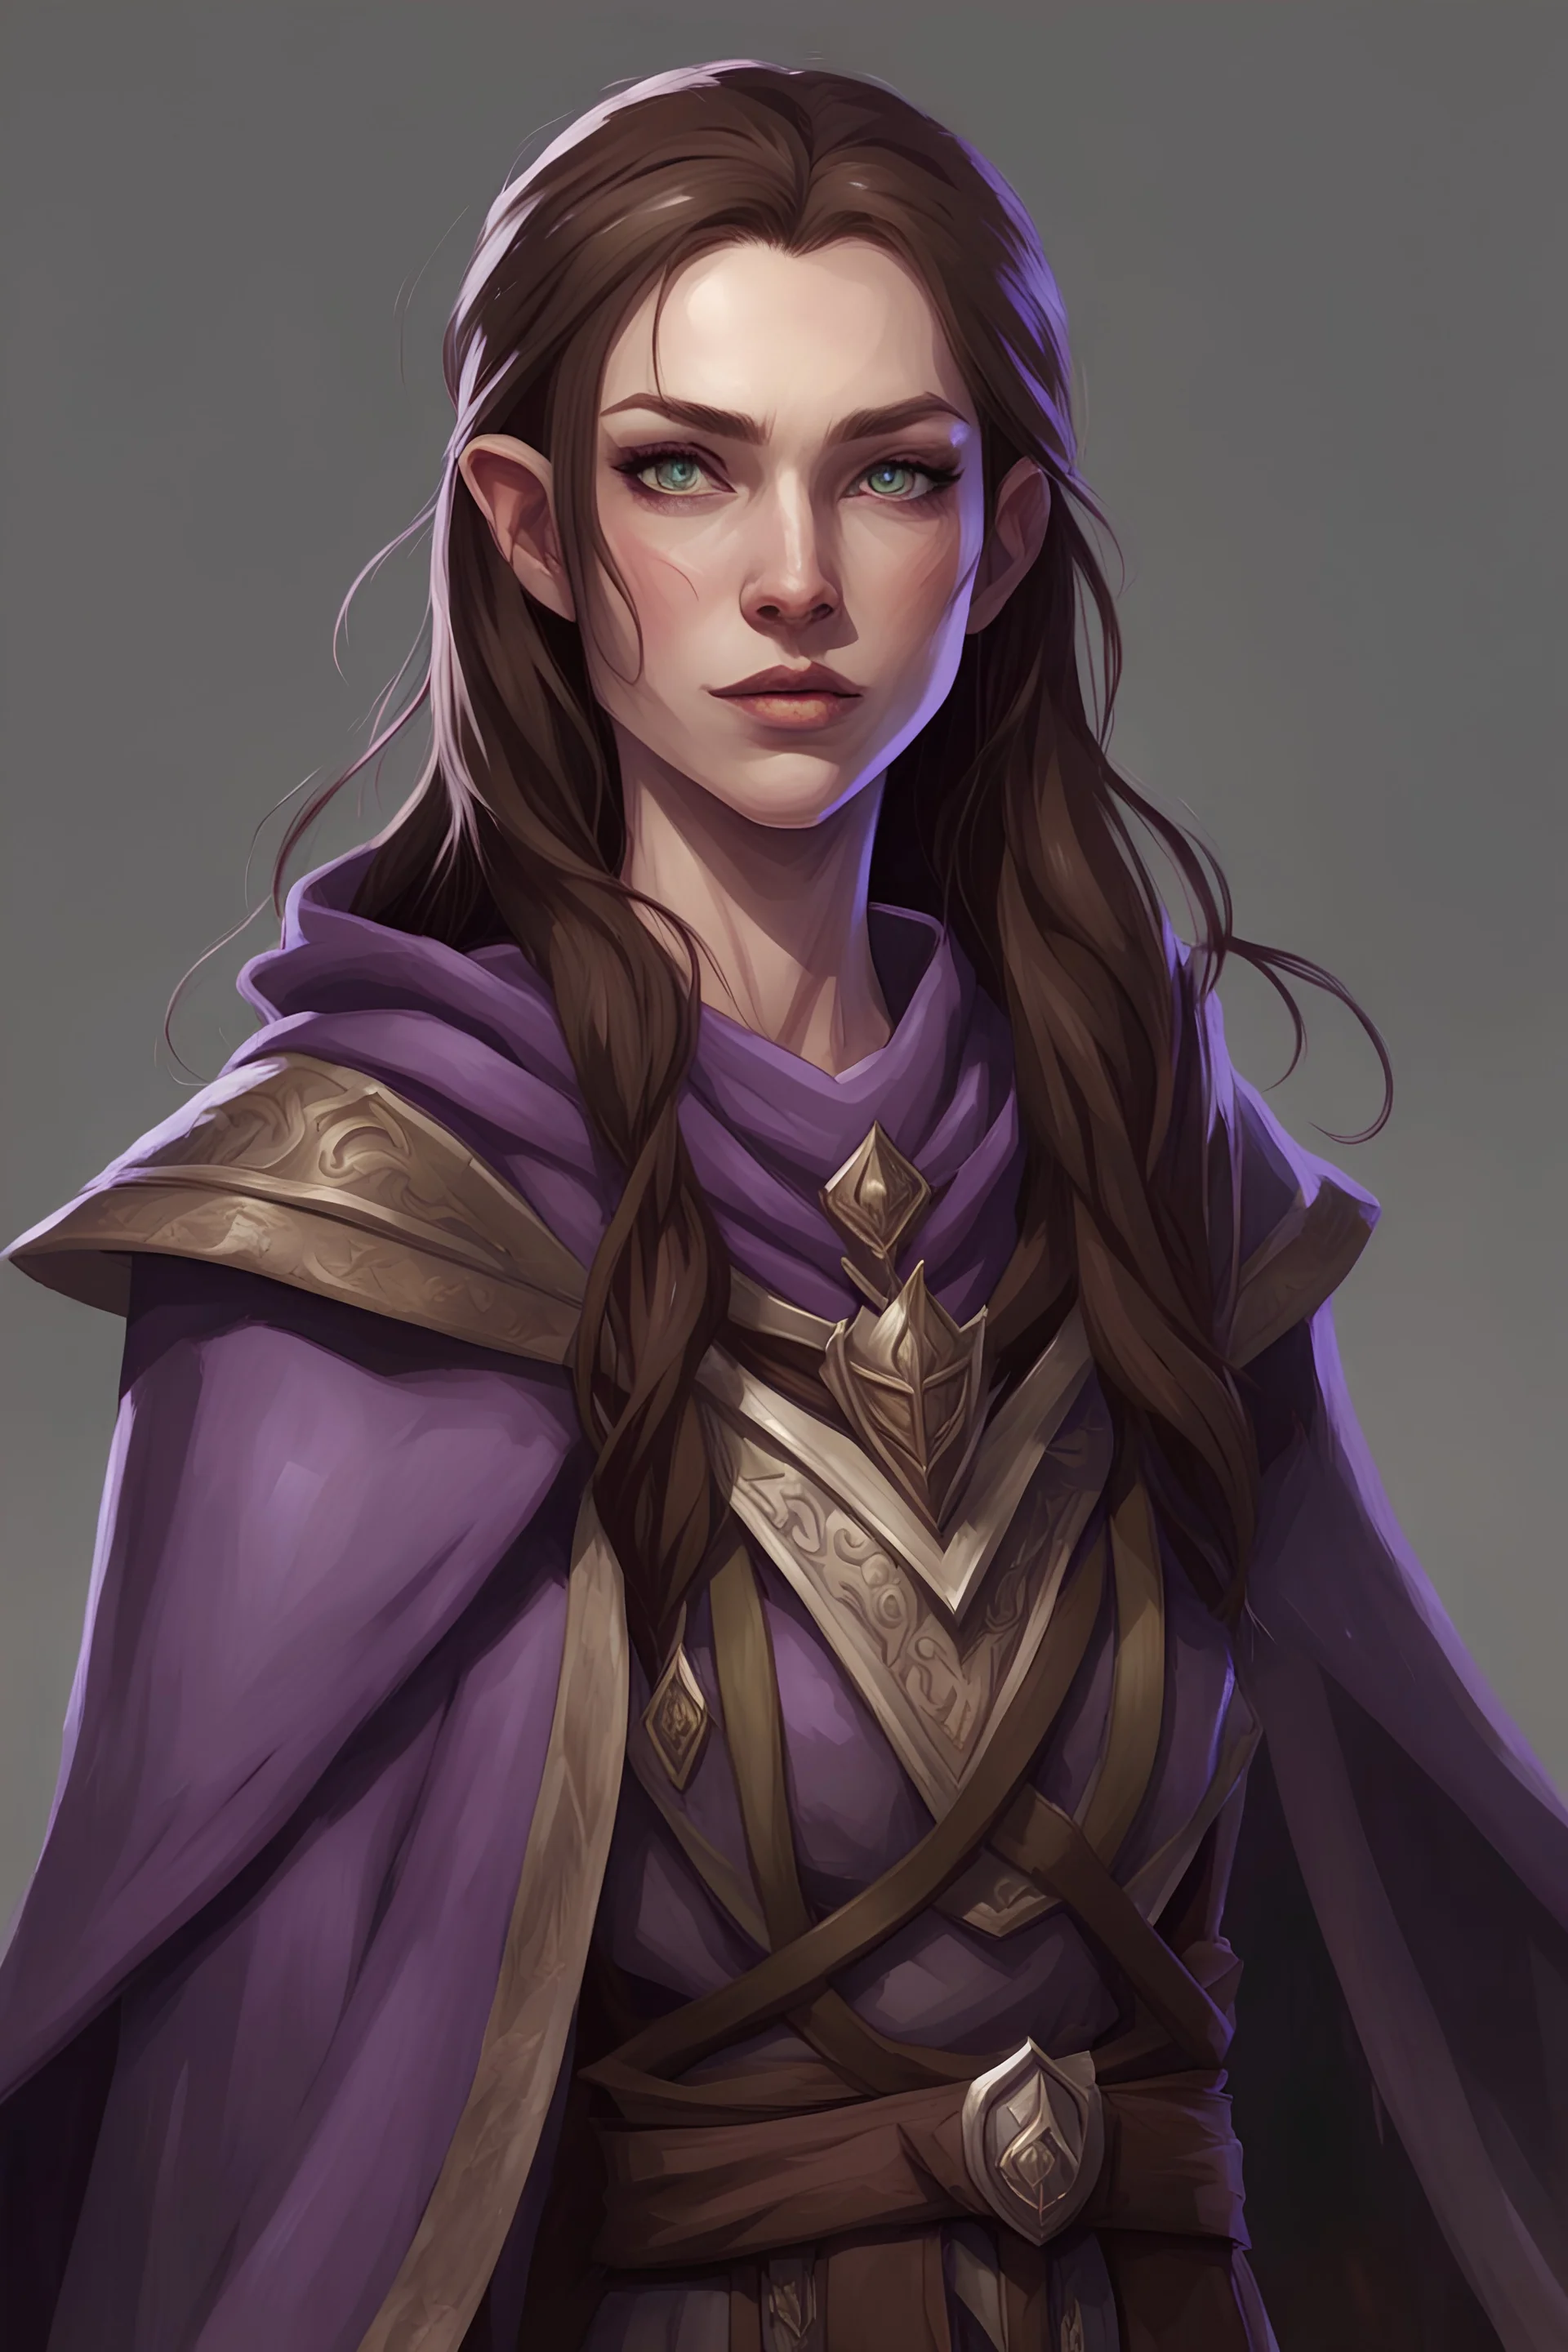 cahotic neutral charismatic Wood Elf Bard Female with pale skin and very sharp features, long brown hair, wearing a purple vest and brown adventurer's cloak with a smug face.